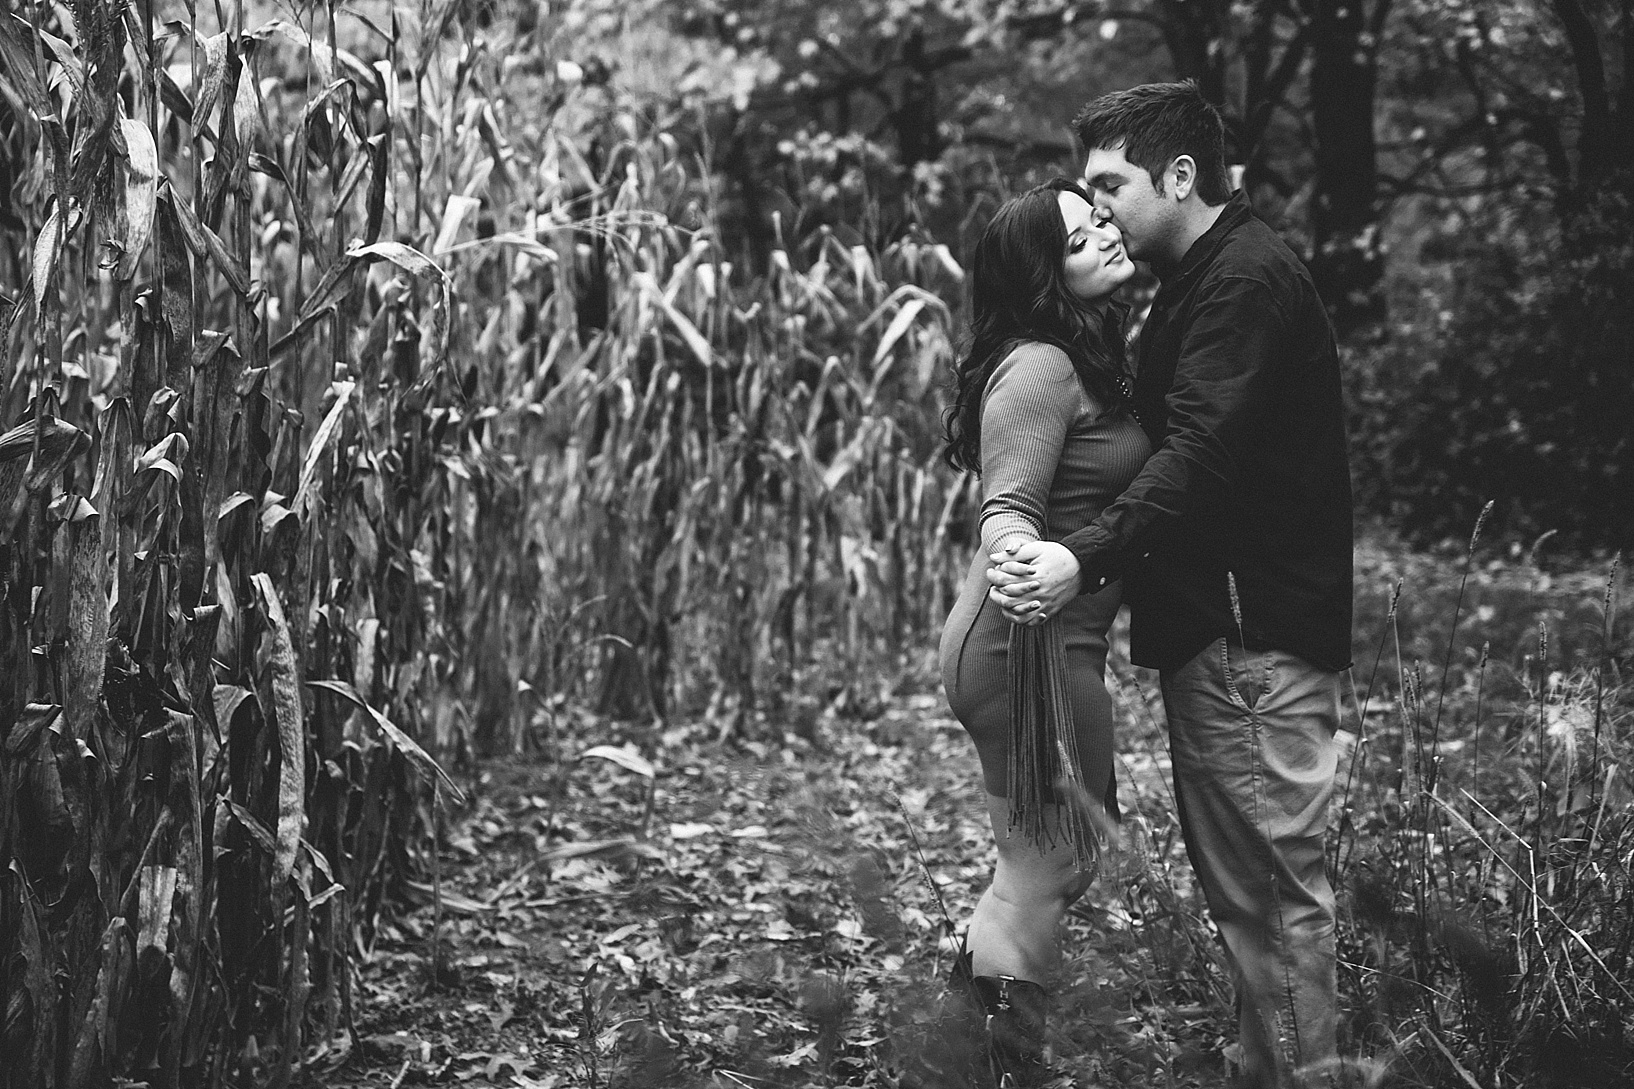 black and white photo of man kissing woman on cheek in front of corn field